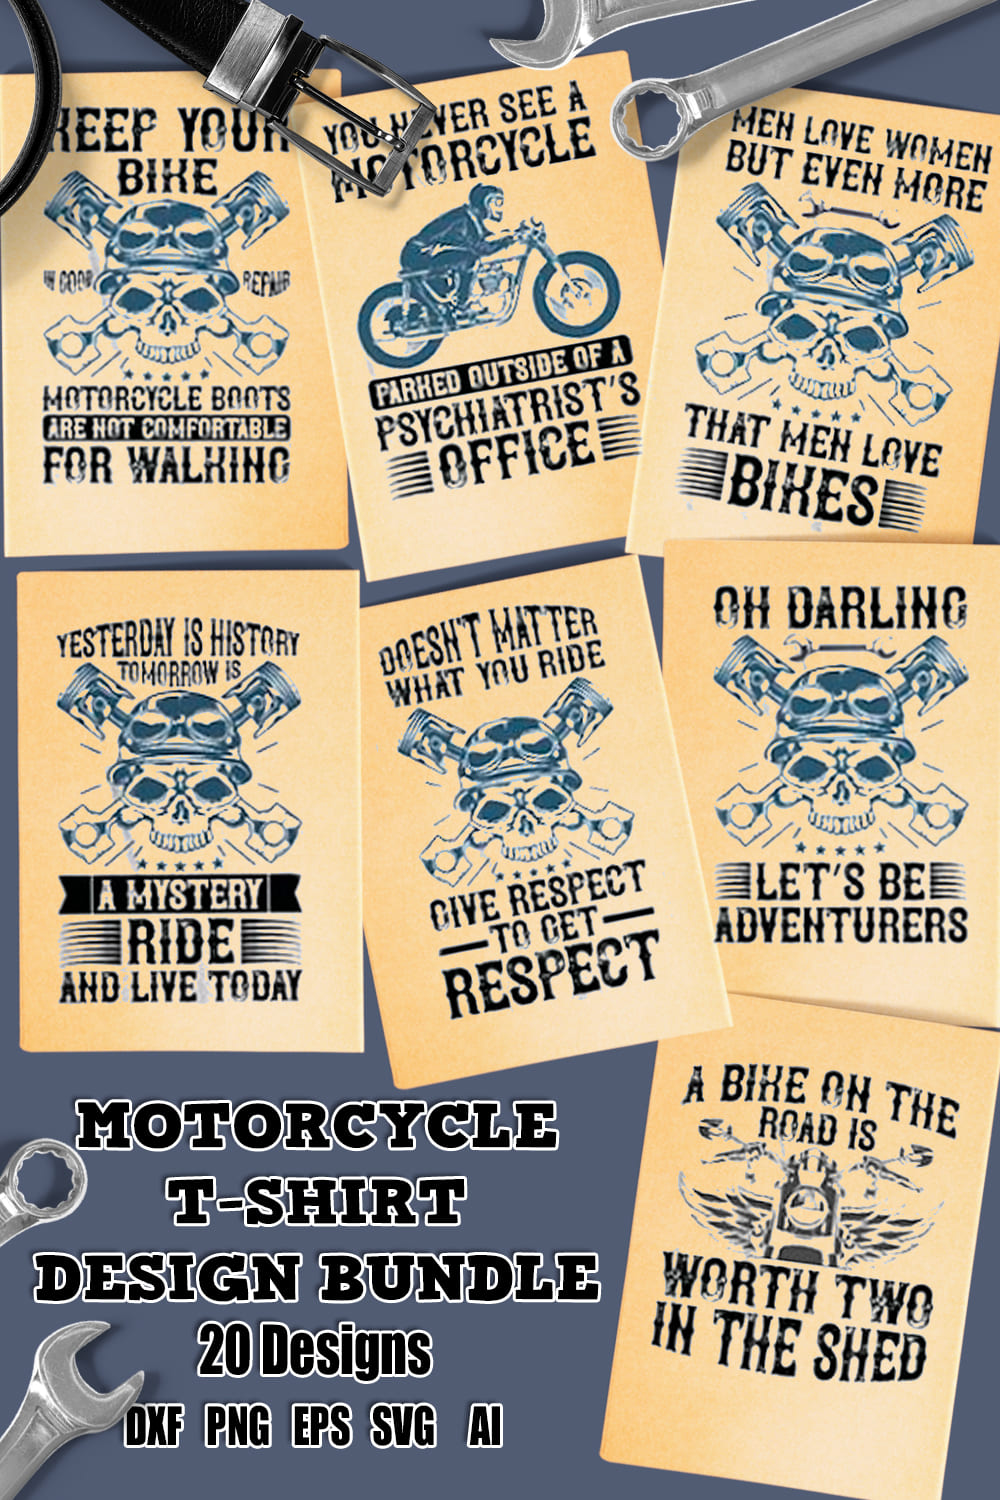 A collection of irresistible biker images.